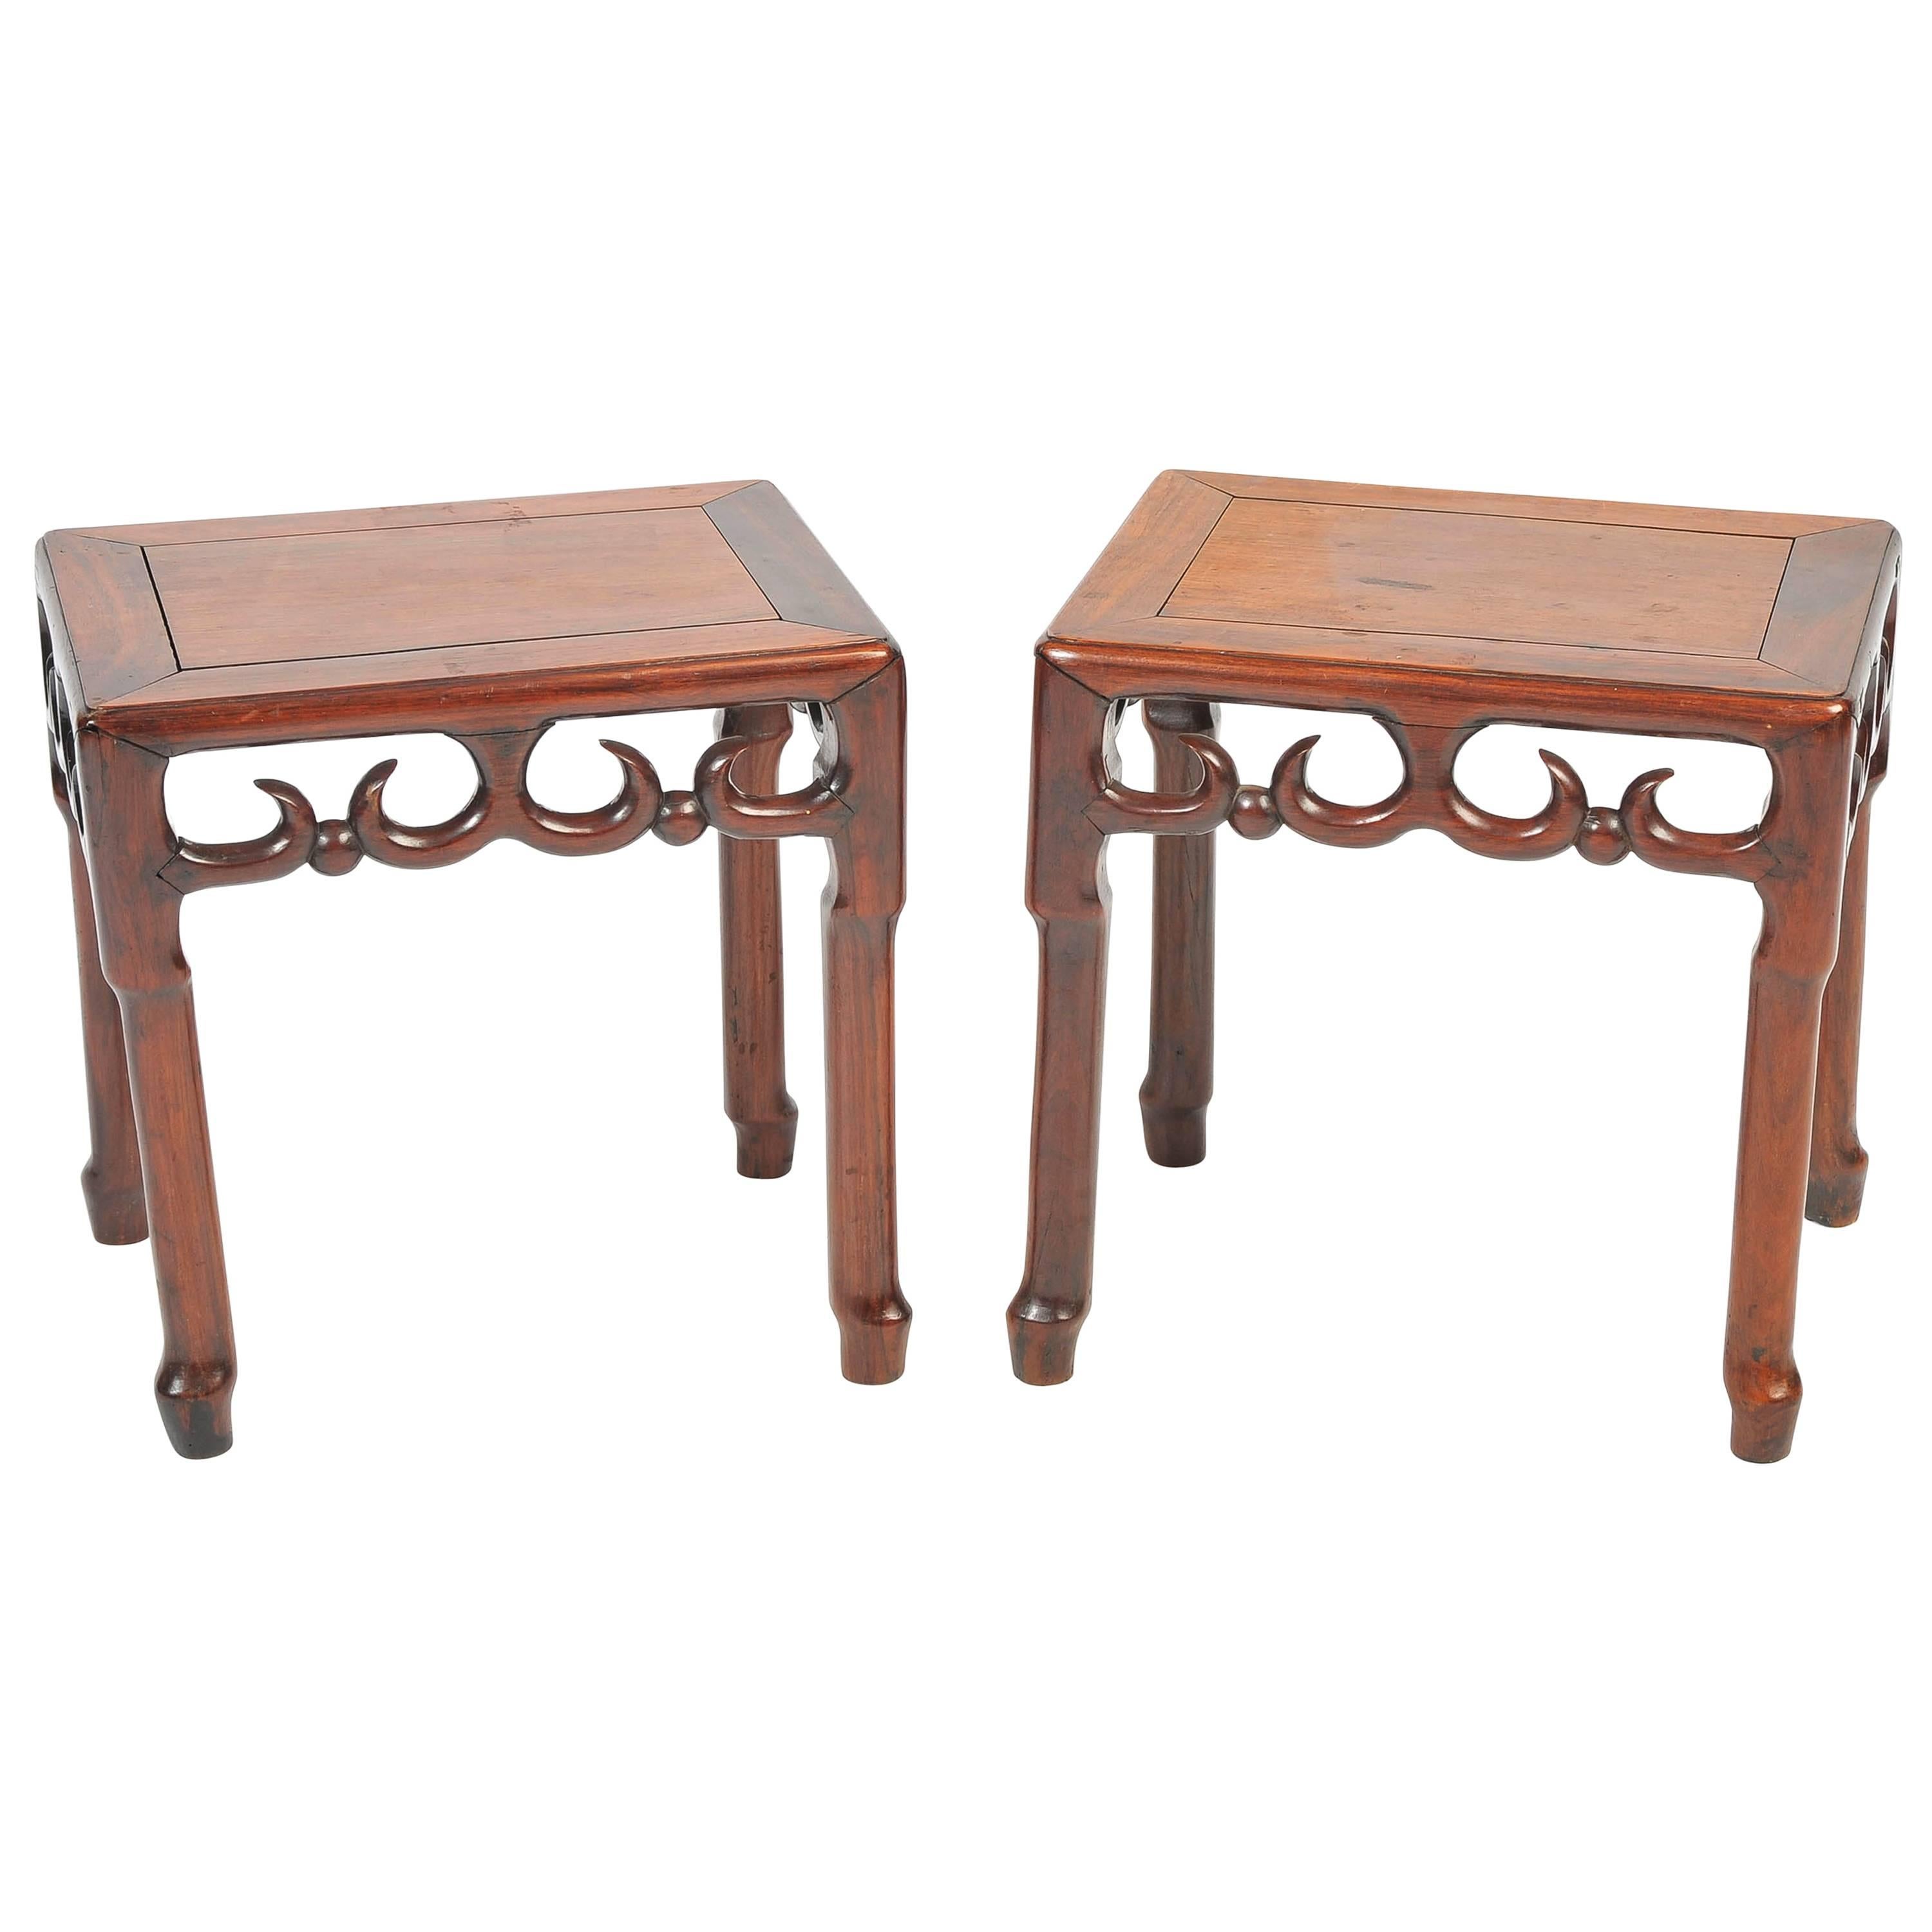 Pair of 19th Century Chinese Hardwood Side Tables